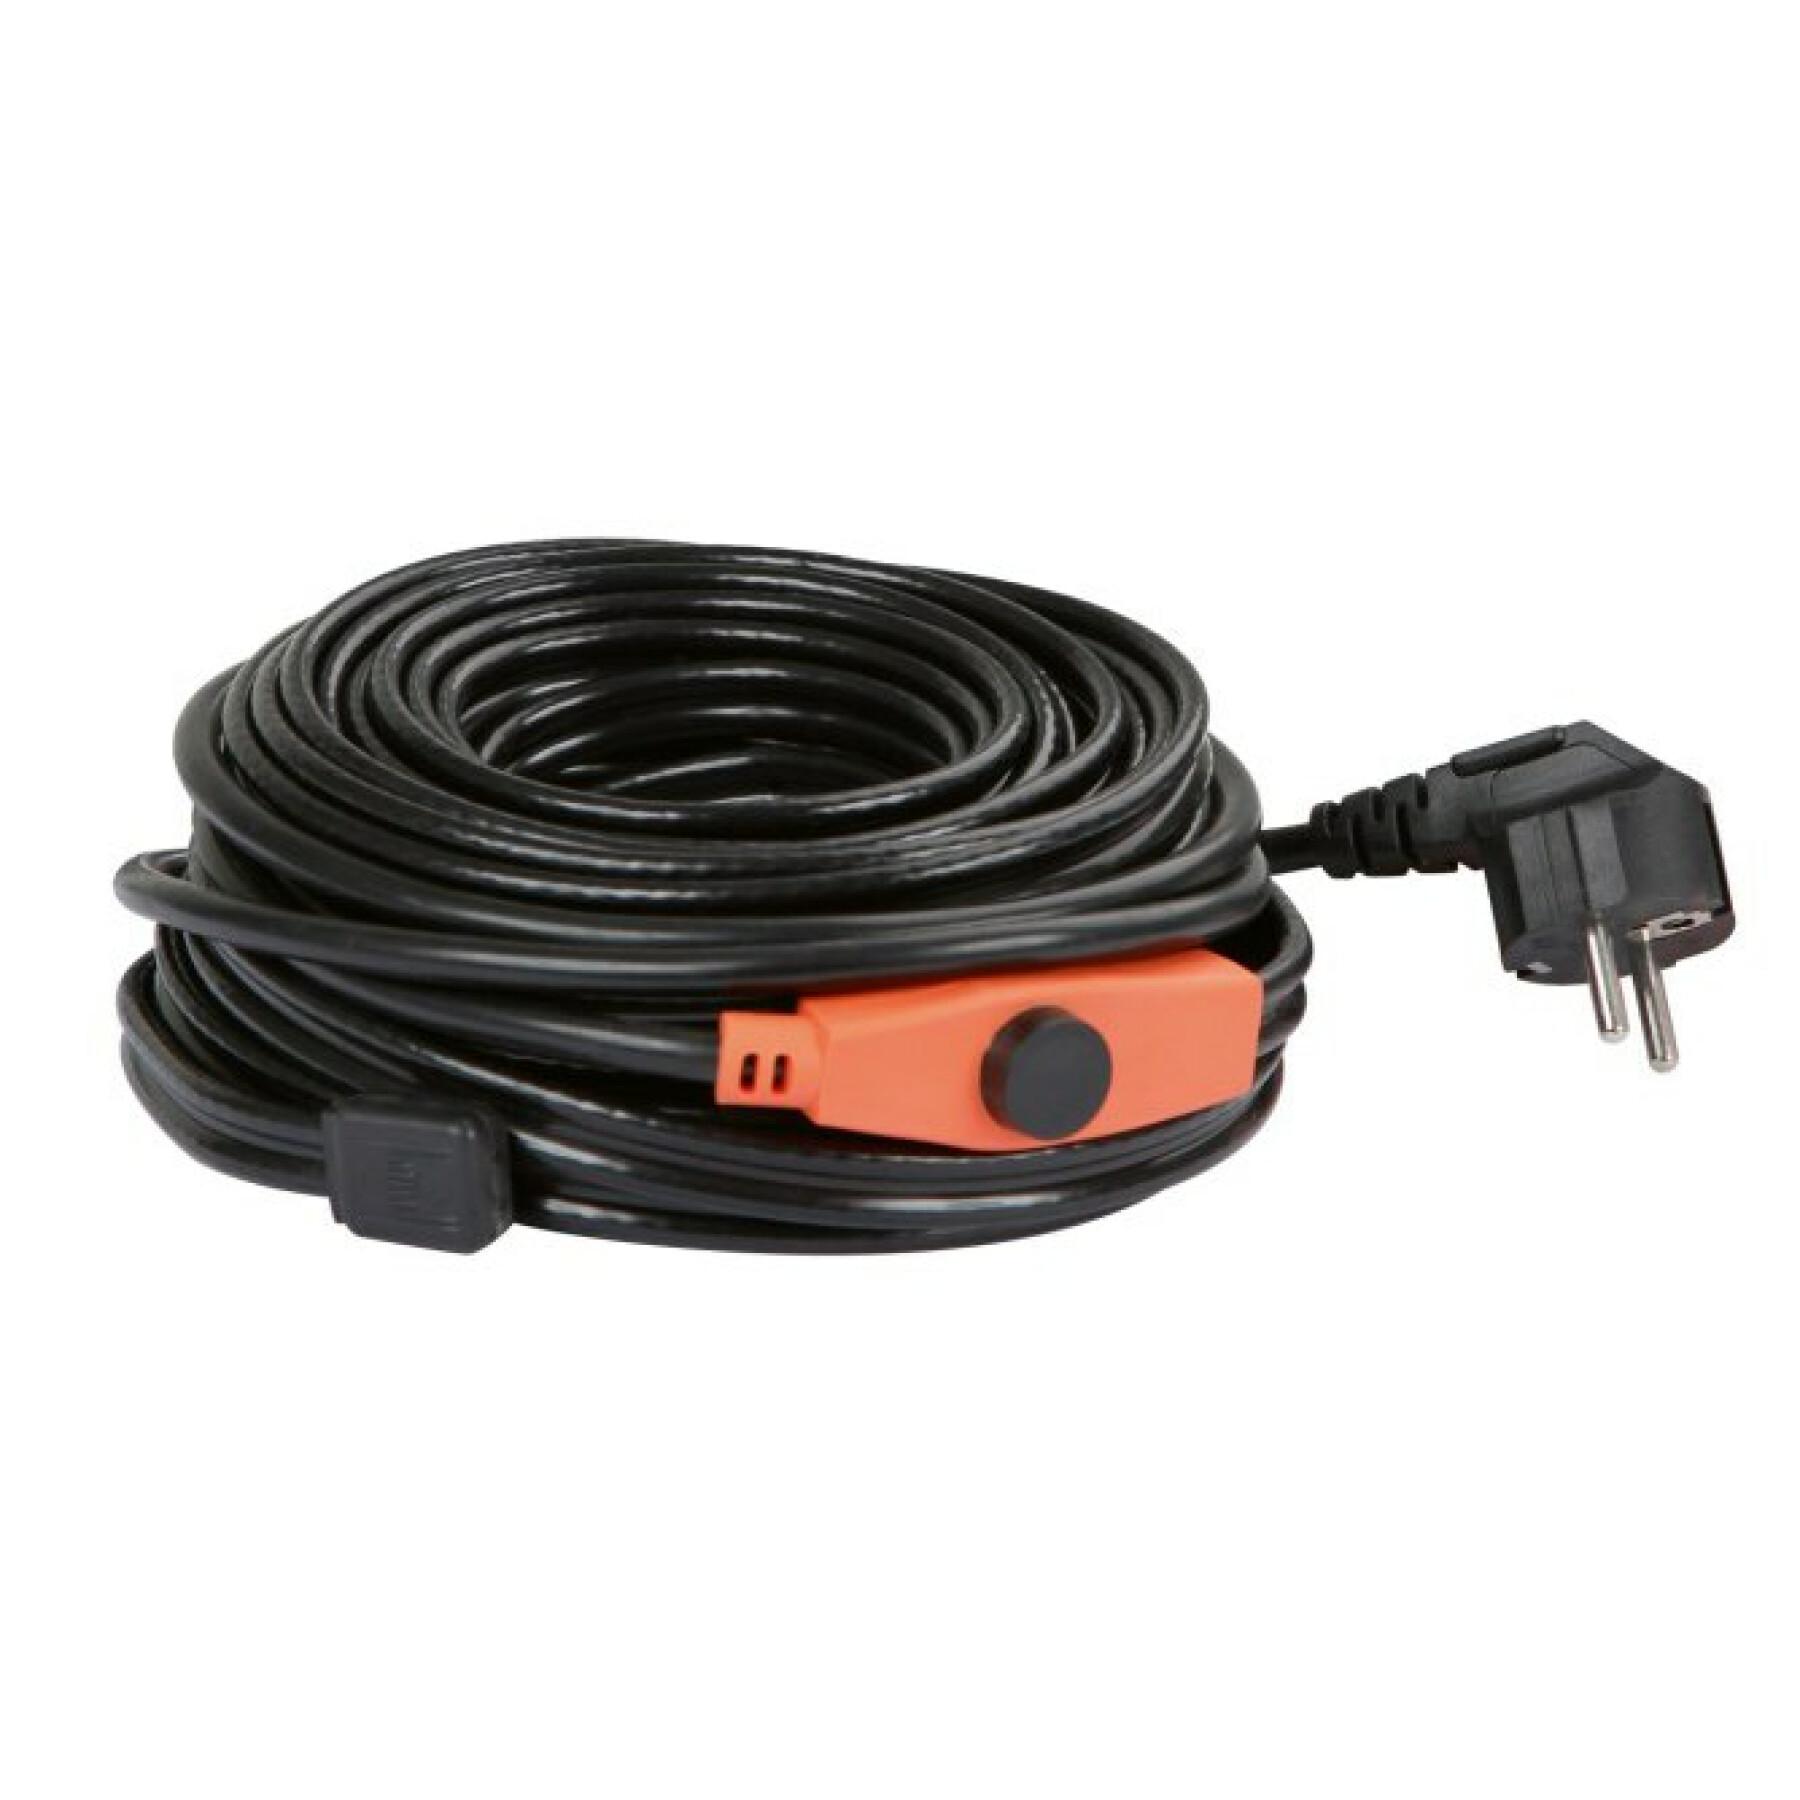 Heating cable Kerbl 230V 12m,192W